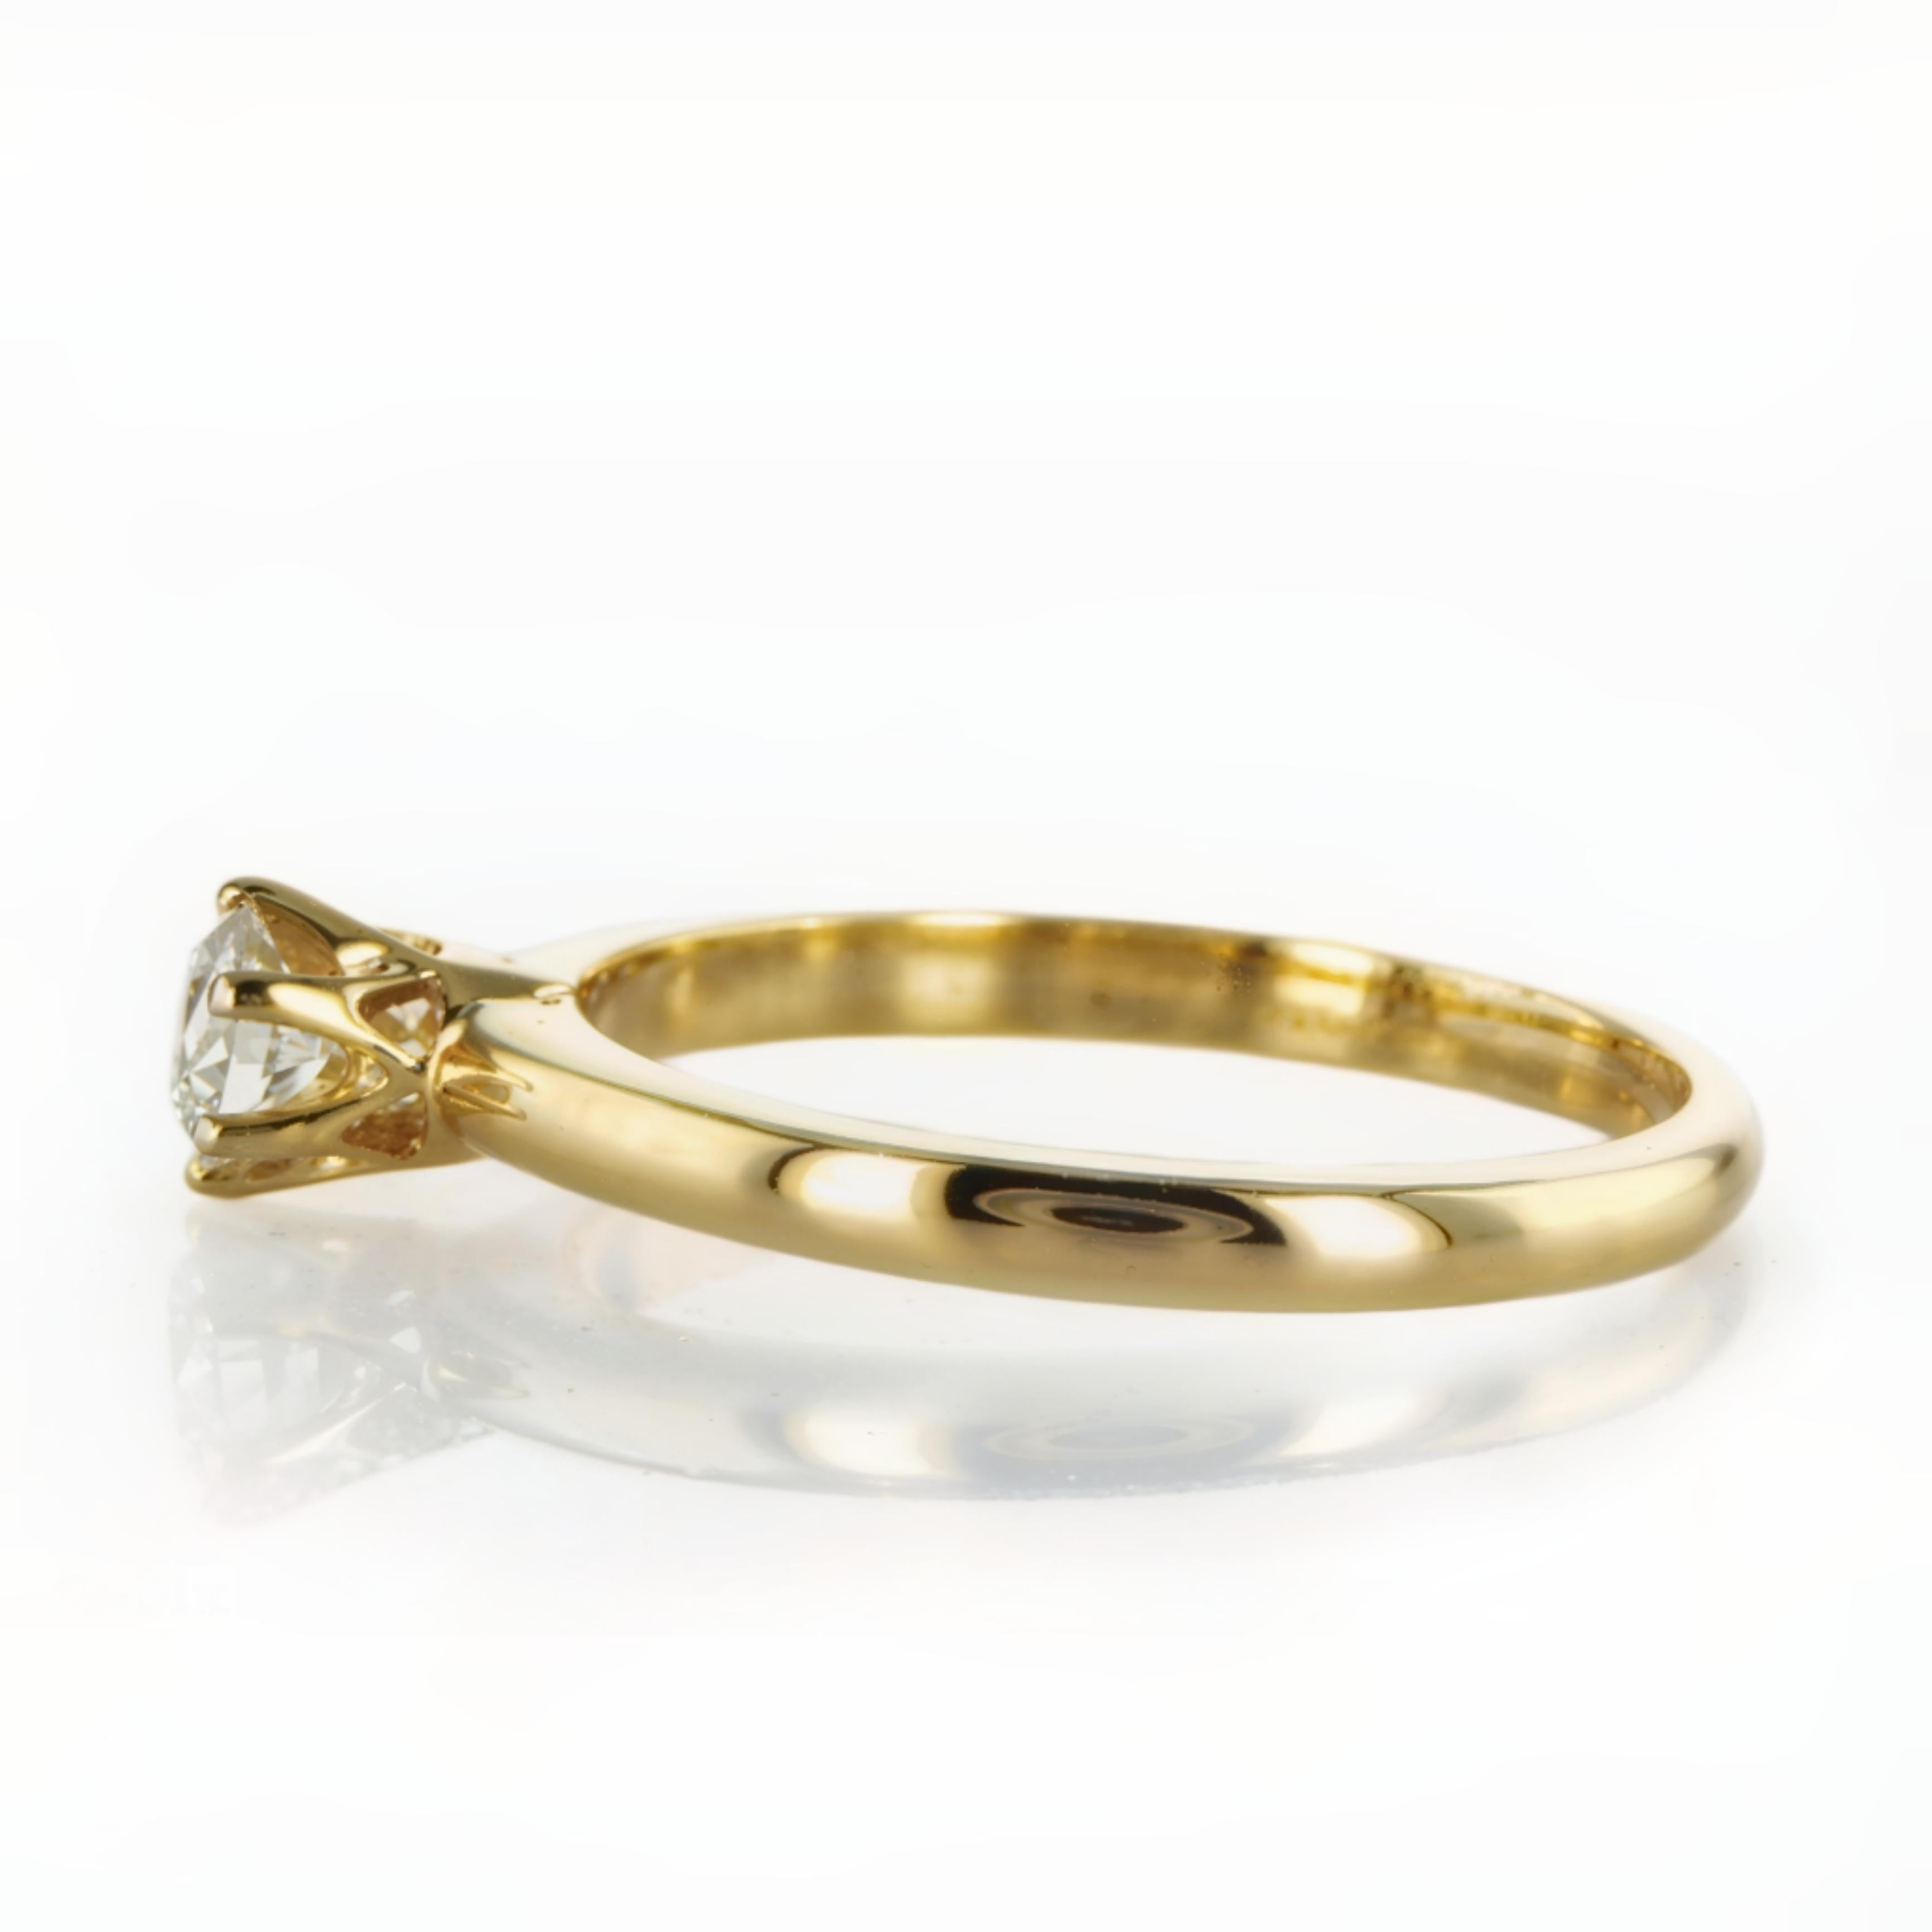 For Sale:  Stunning Classic 0.25 Carat Diamond Solitaire Ring in 14K Gold 3